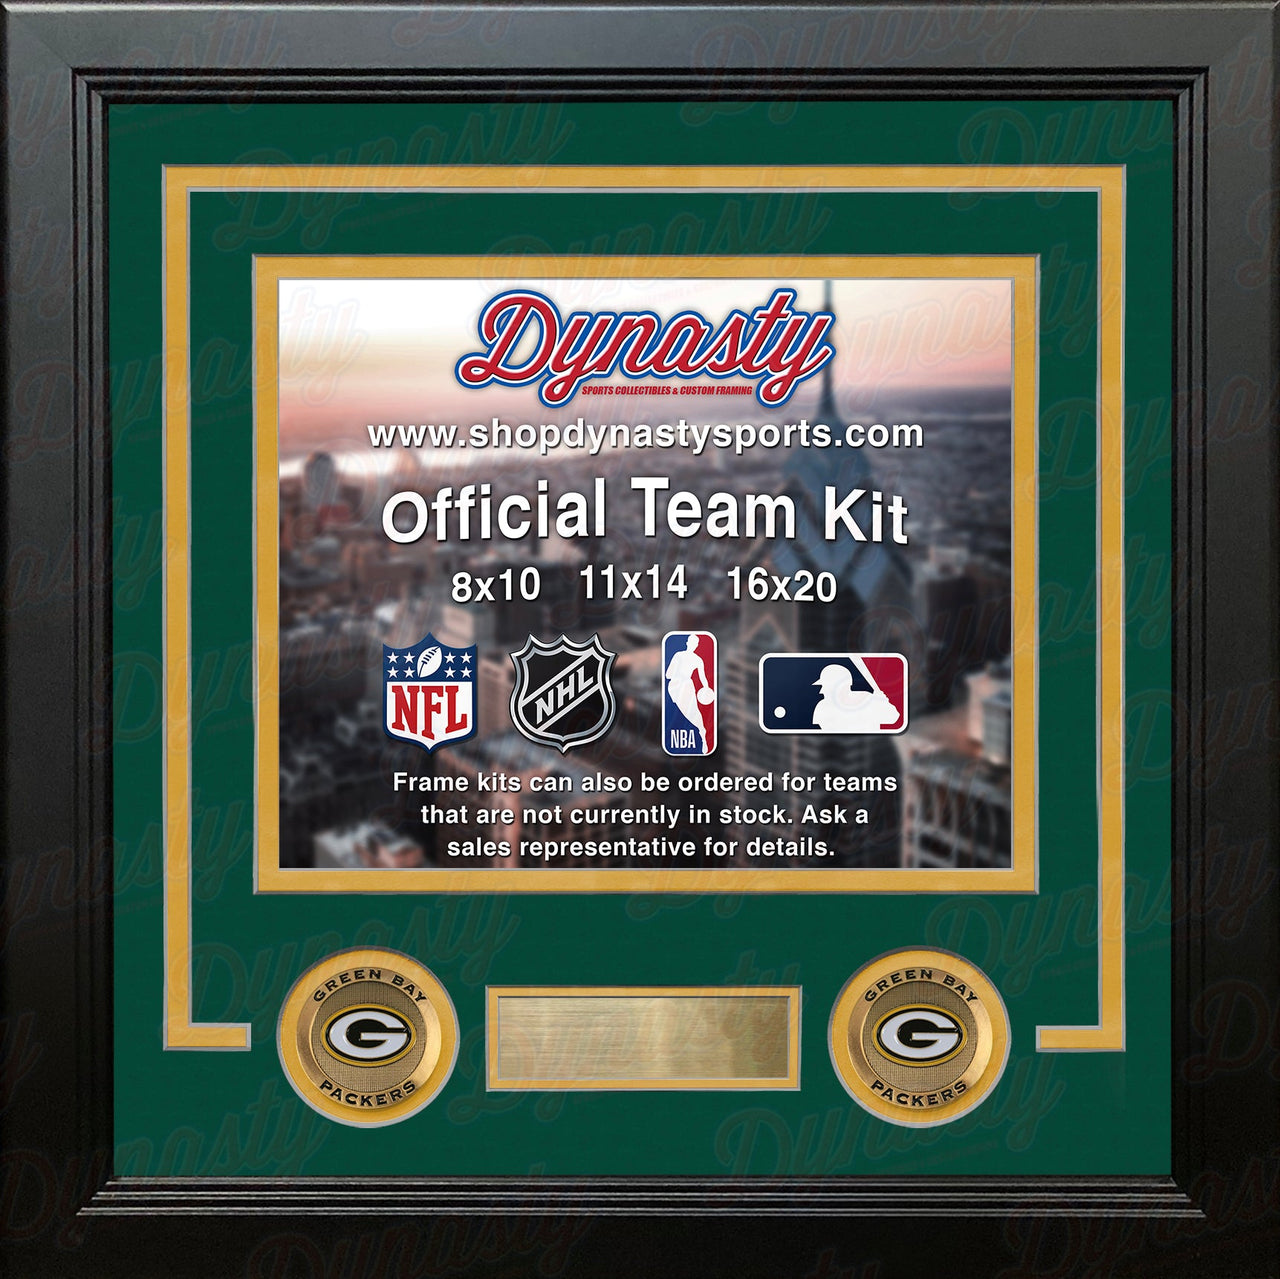 Green Bay Packers Custom NFL Football 16x20 Picture Frame Kit (Multiple Colors) - Dynasty Sports & Framing 